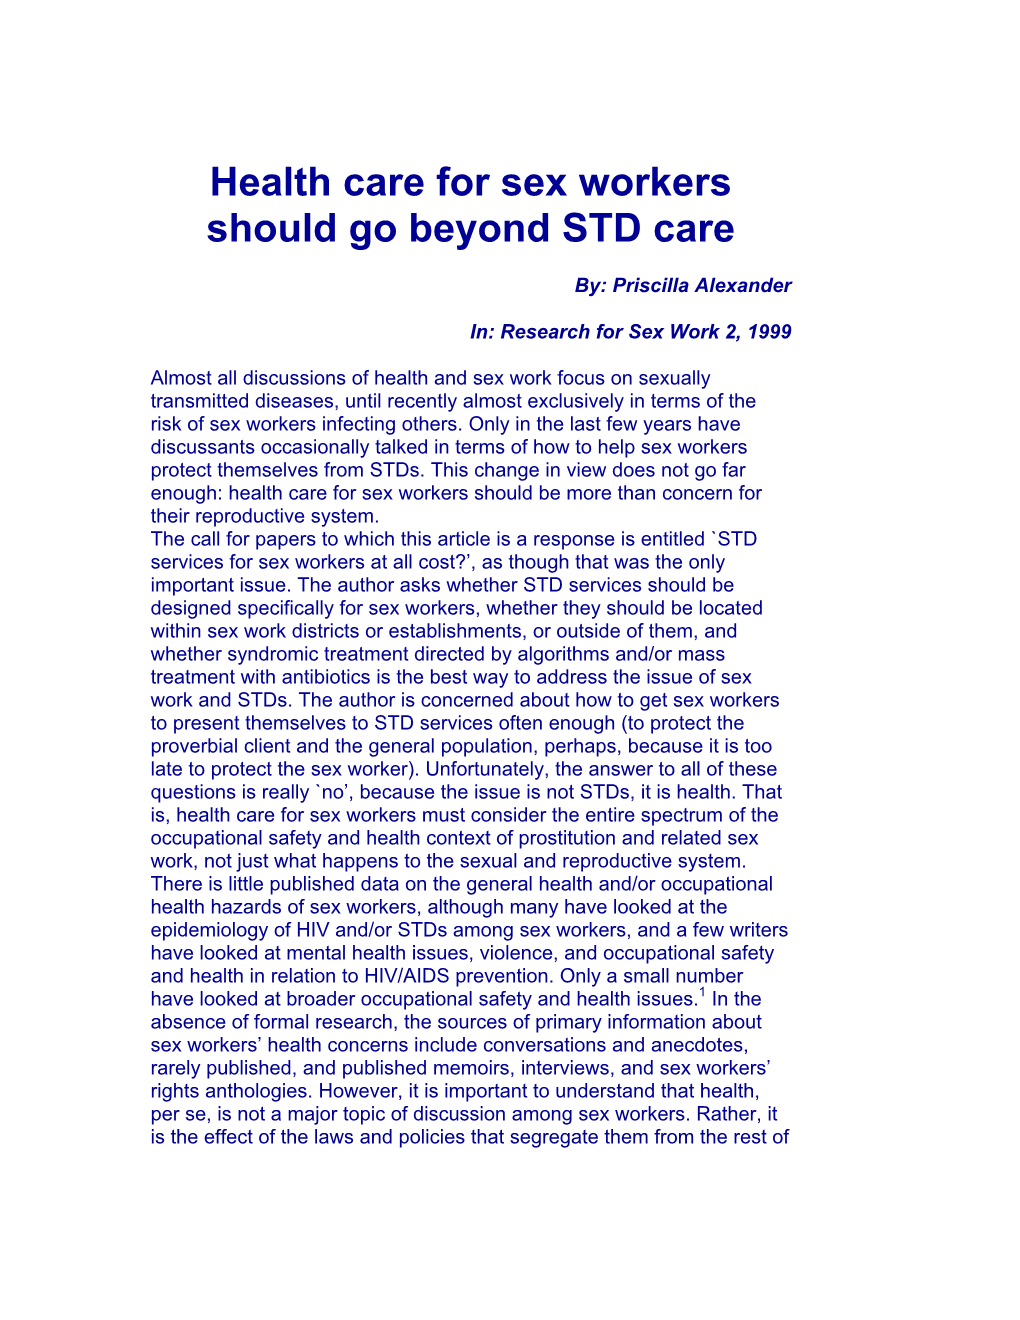 Health Care for Sex Workers Should Go Beyond STD Care